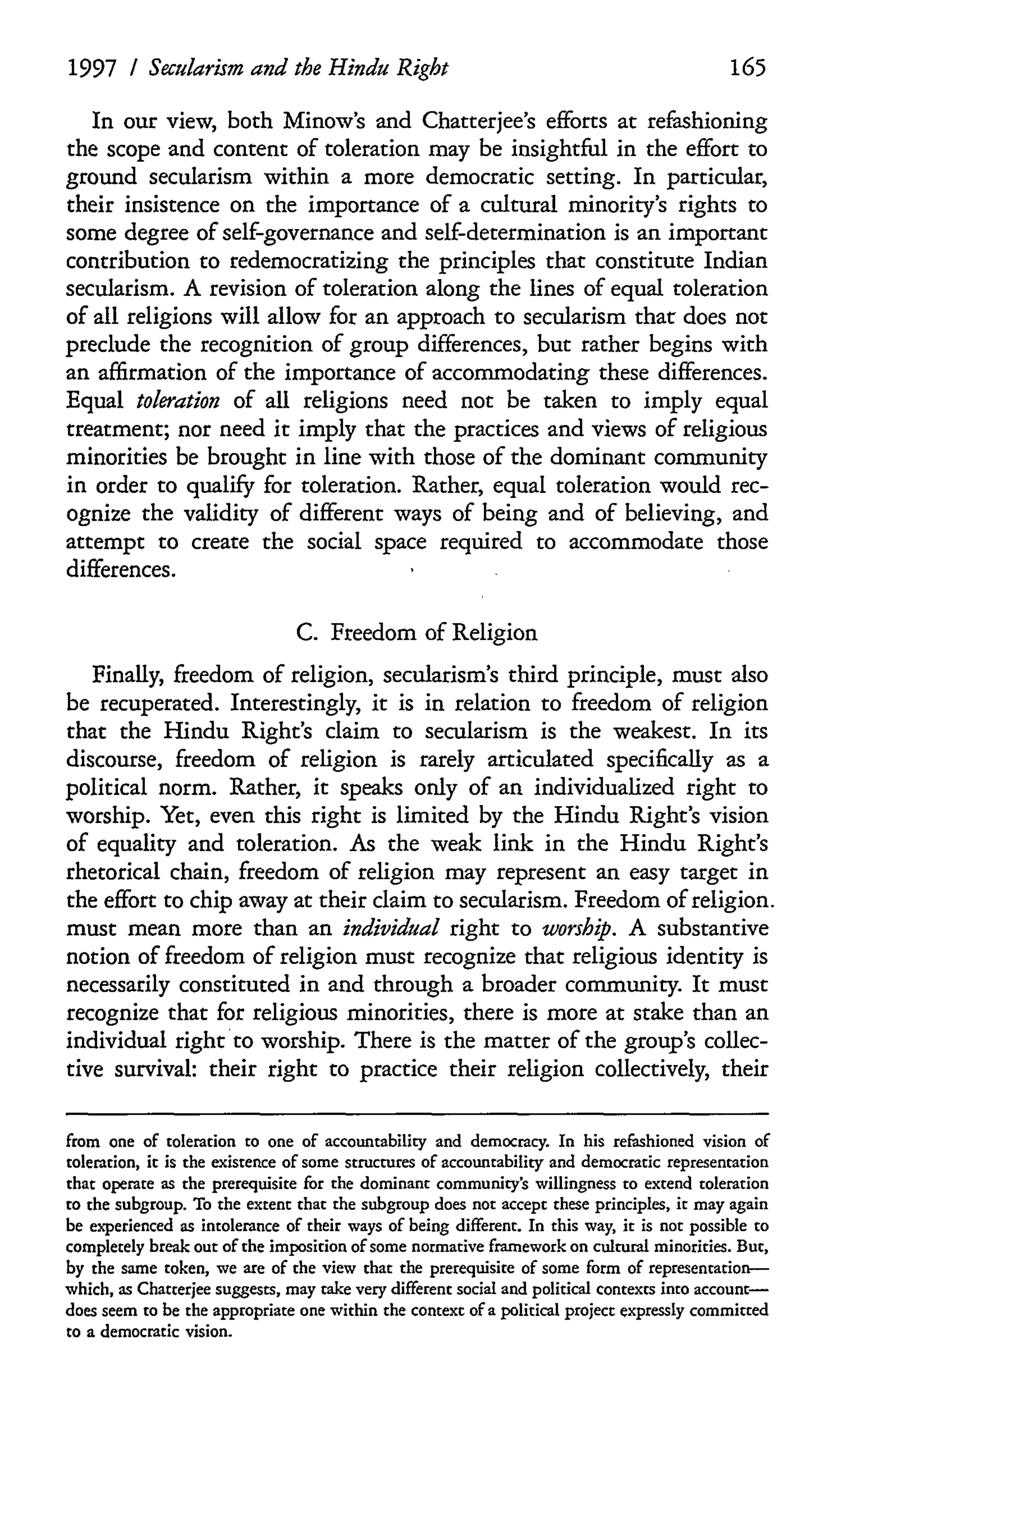 1997 / Secularism and the Hindu Right In our view, both Minow's and Chatterjee's efforts at refashioning the scope and content of toleration may be insightful in the effort to ground secularism